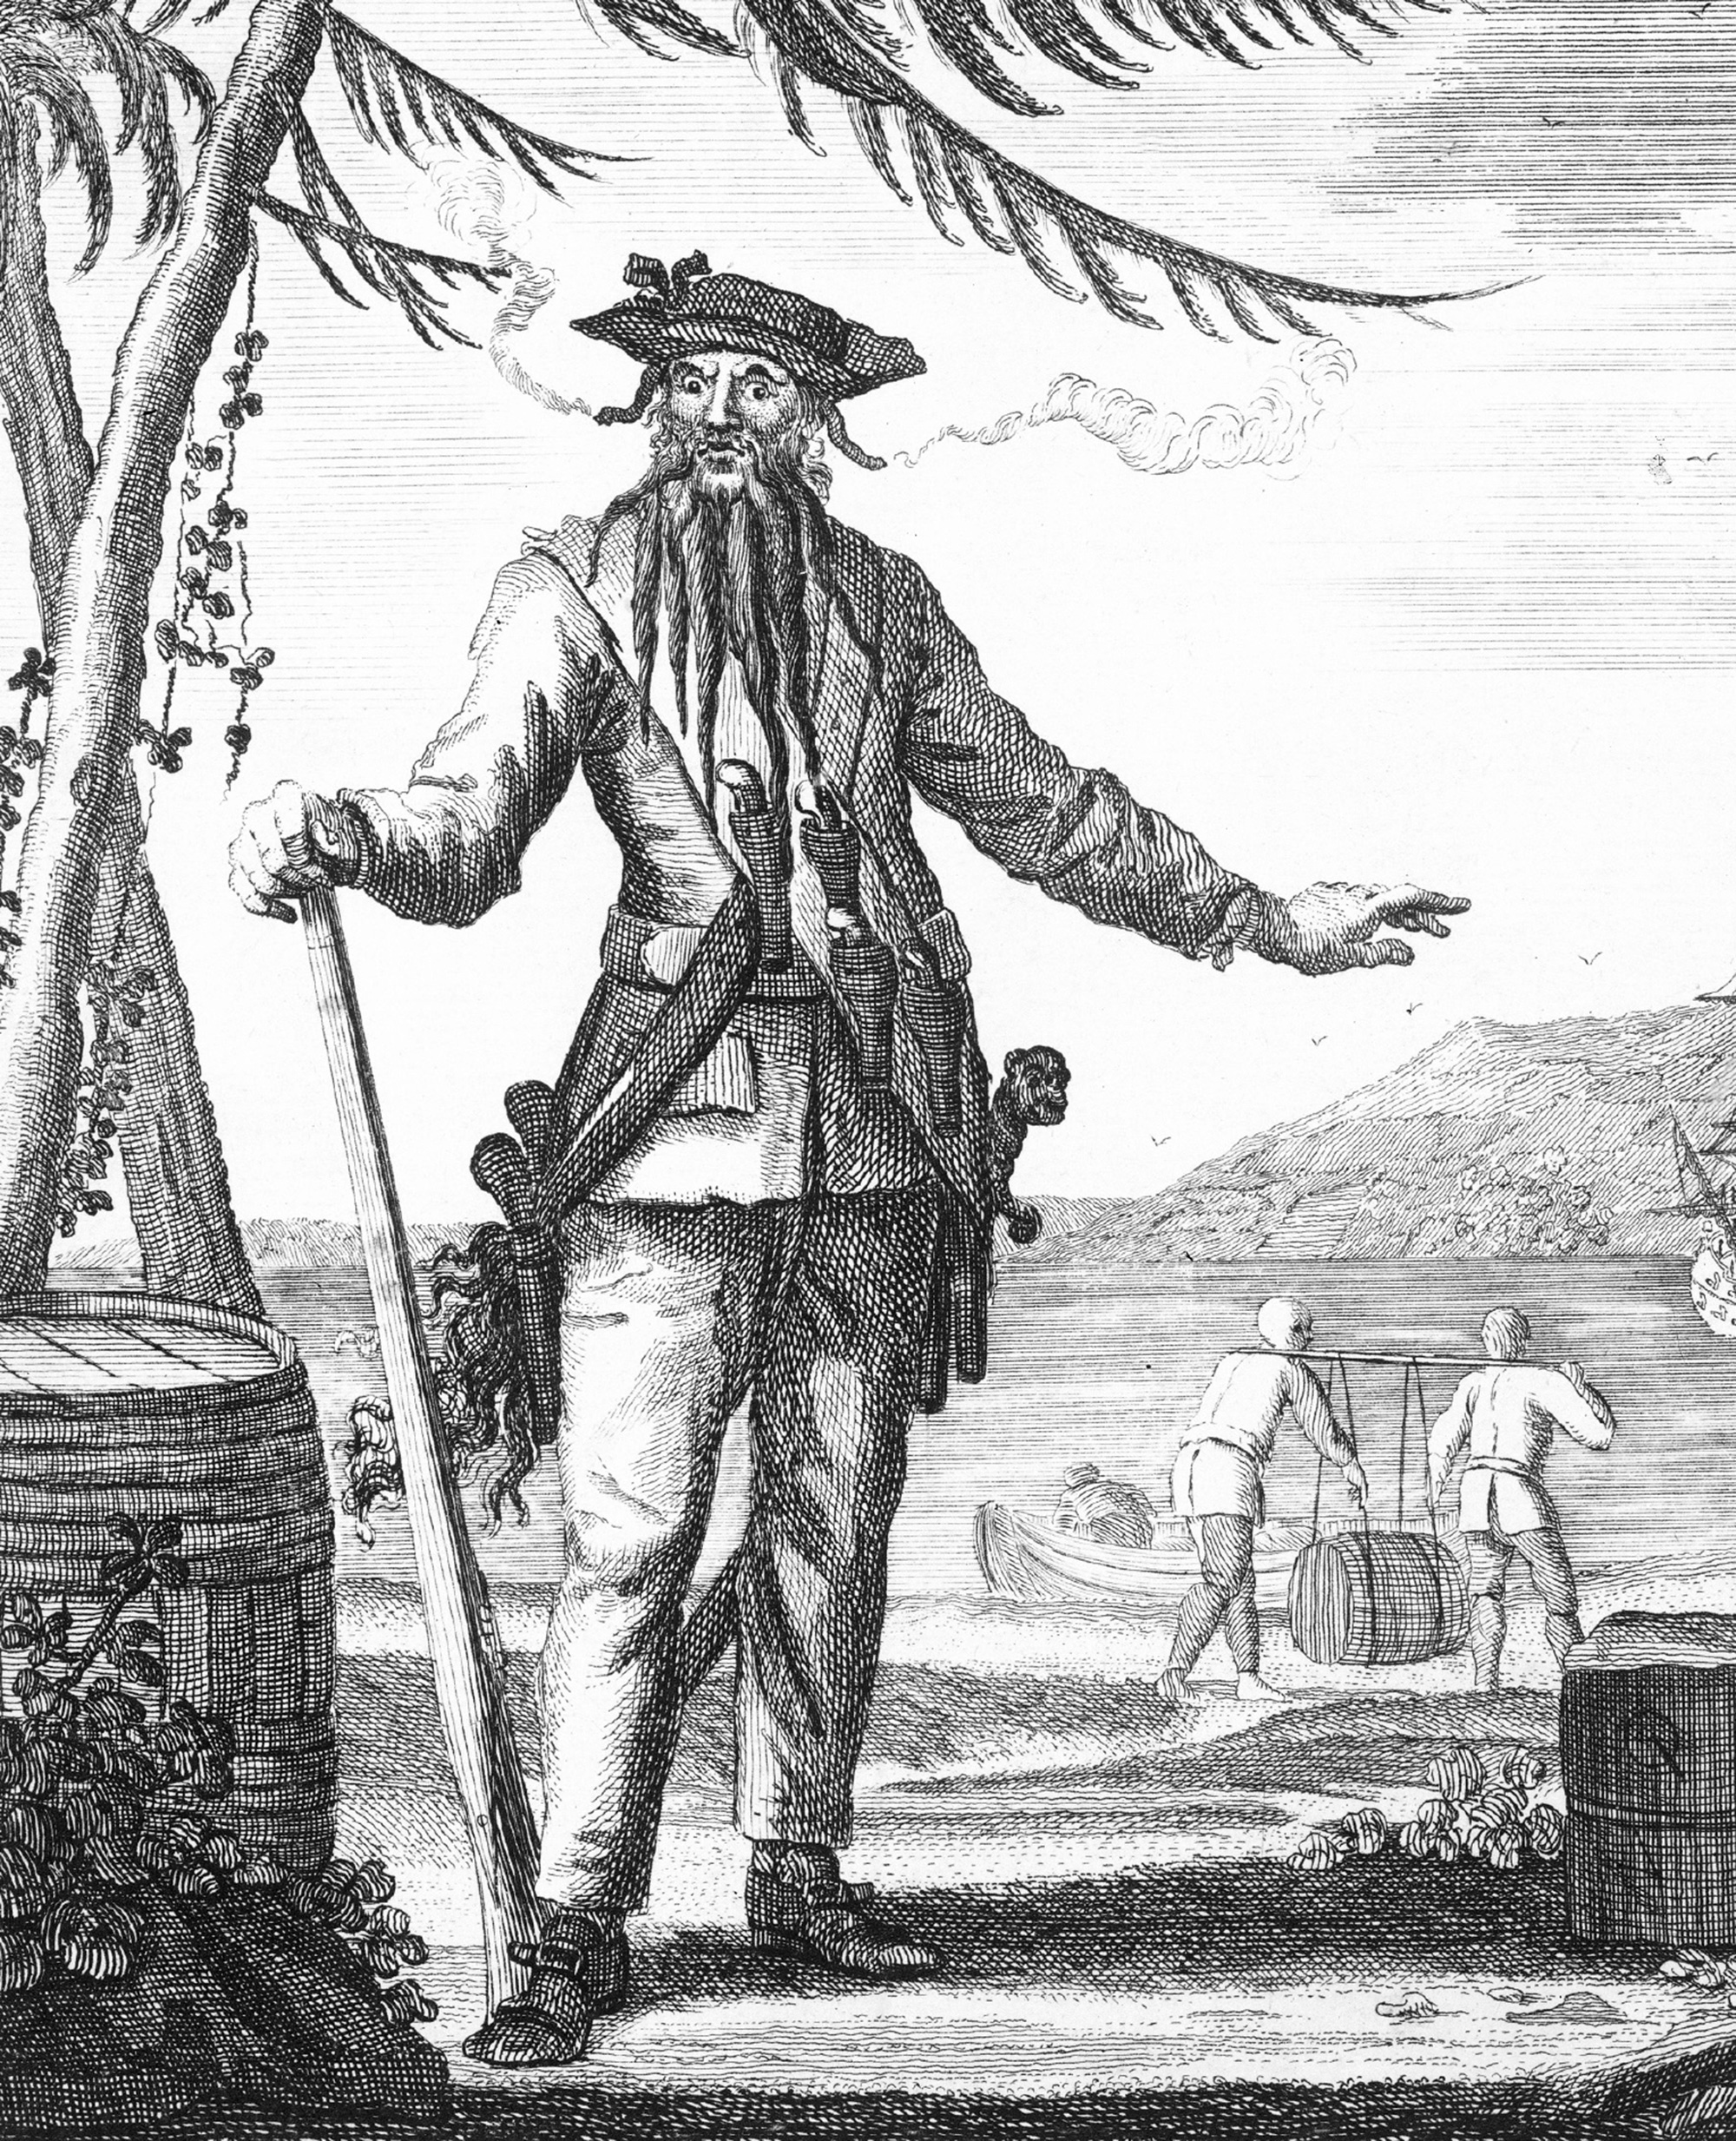 Blackbeard from A General History of the Pyrates. Courtesy National
Maritime Museum Picture Library.